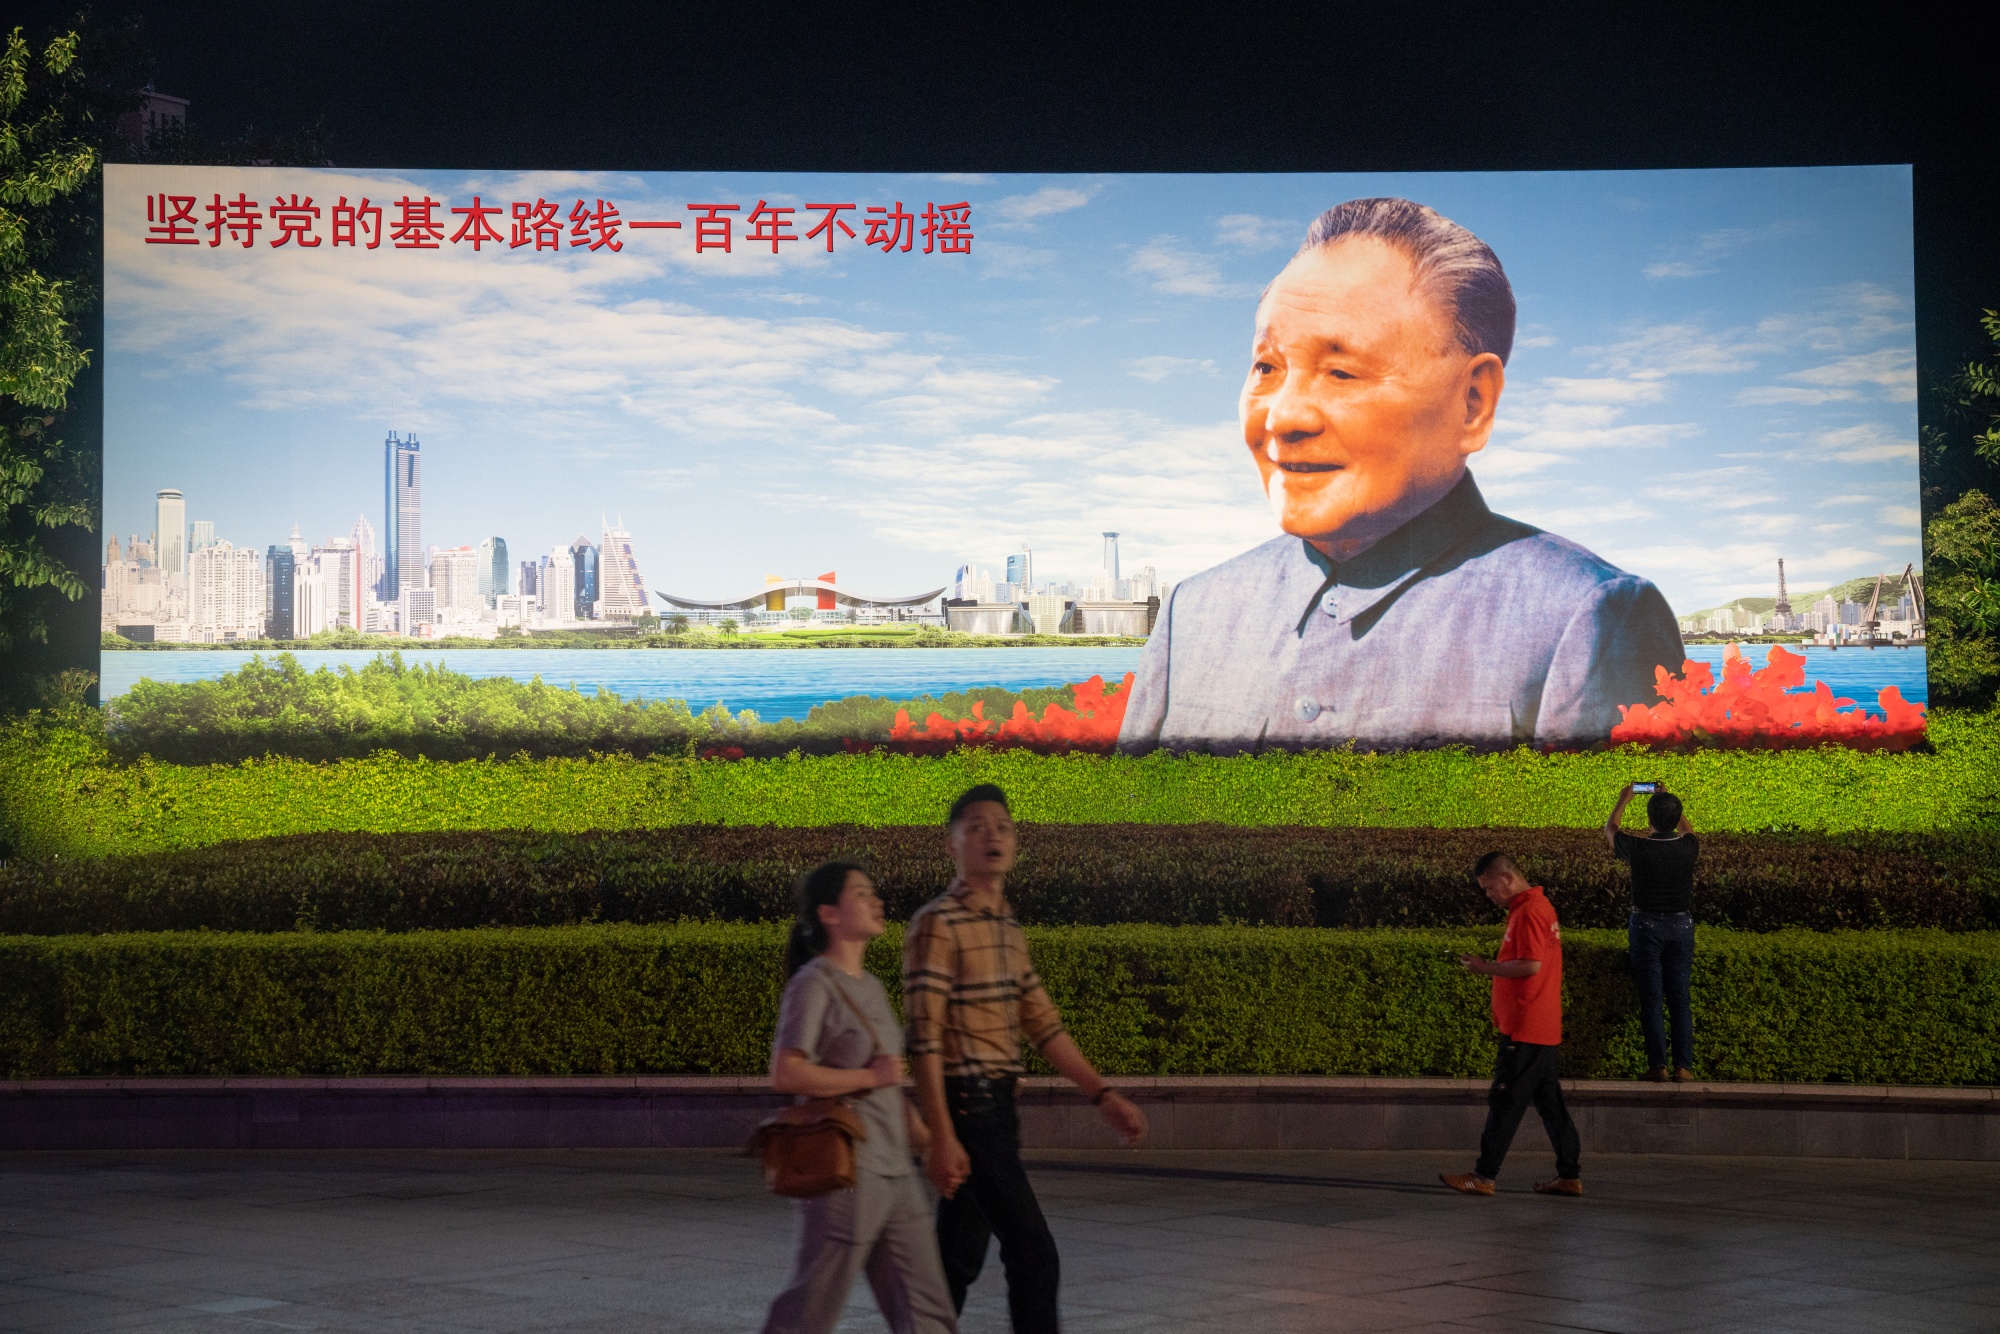 Imagery of Deng Xiaoping as 'Xi Thought' Cements Party Influence After Deng's Legacy of Reform